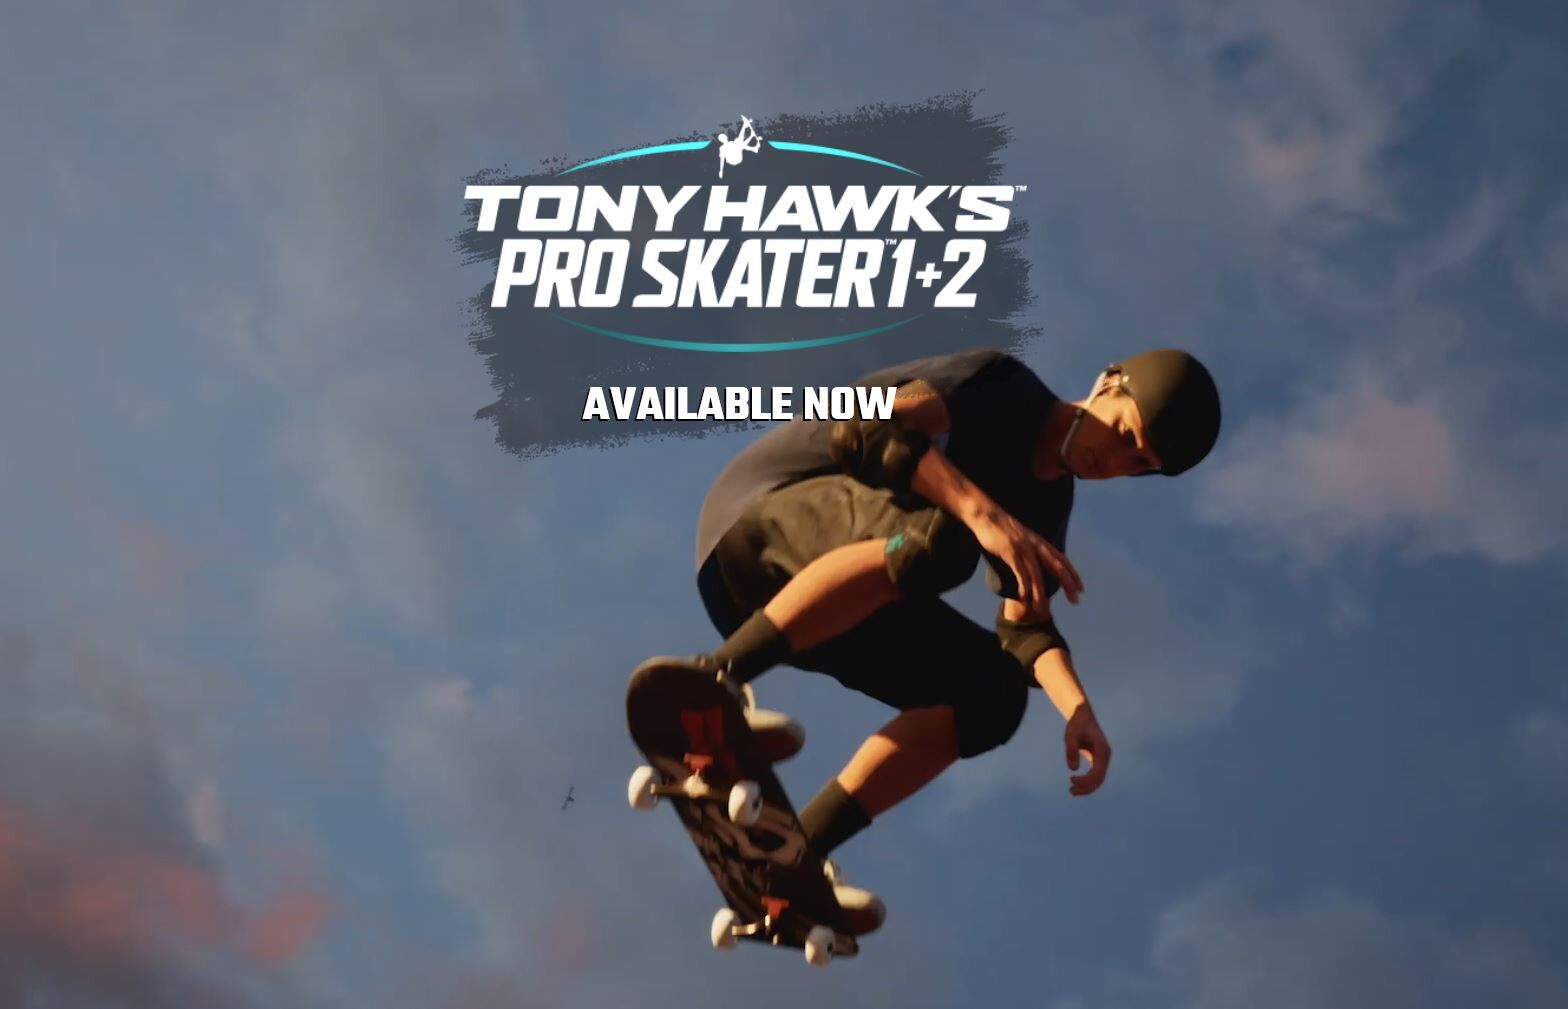 DO A KICKFLIP! BEST OF ALL TIME: With Tony Hawk, Eric Koston